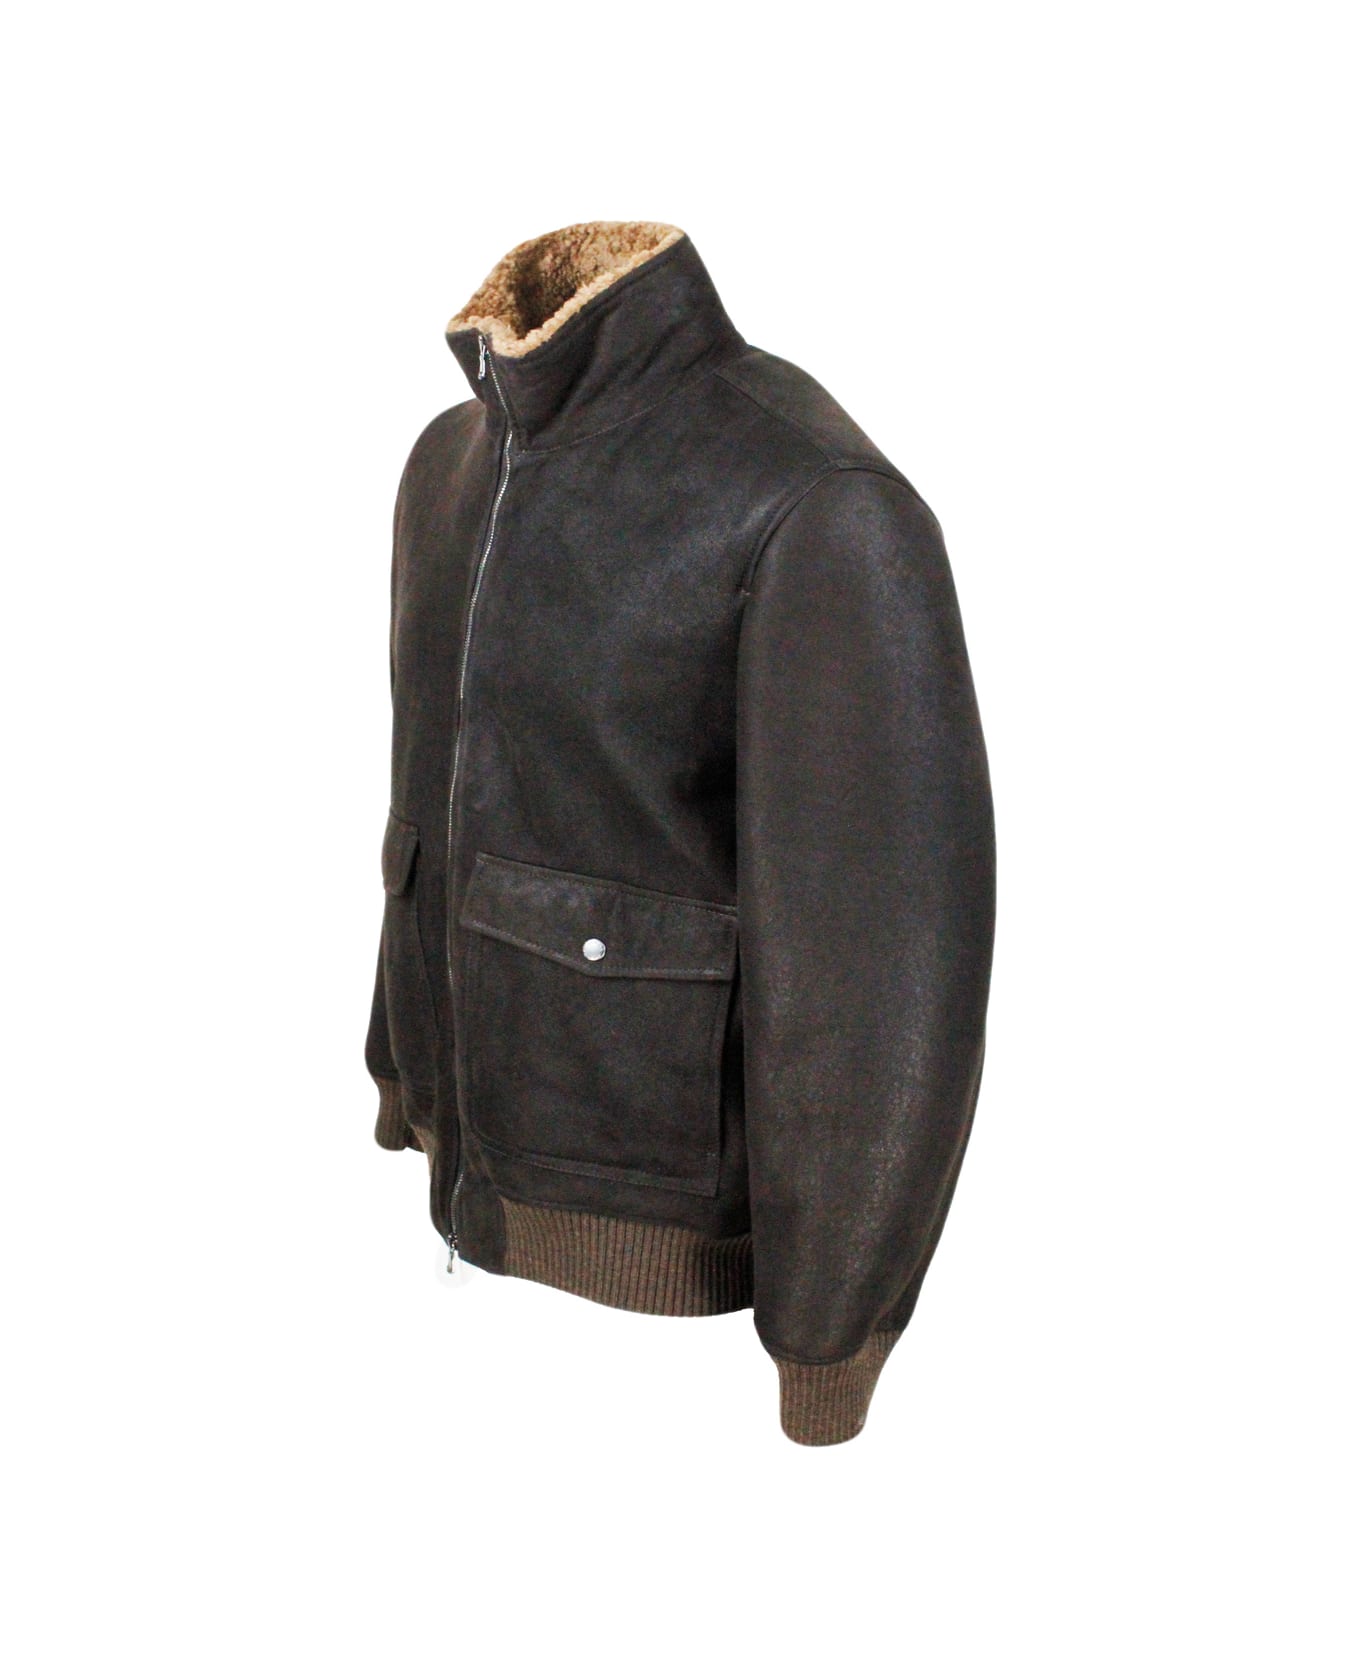 Barba Napoli Bomber Jacket In Fine And Soft Shearling Sheepskin With Stretch Knit Trims And Zip Closure. Front Pockets - Brown